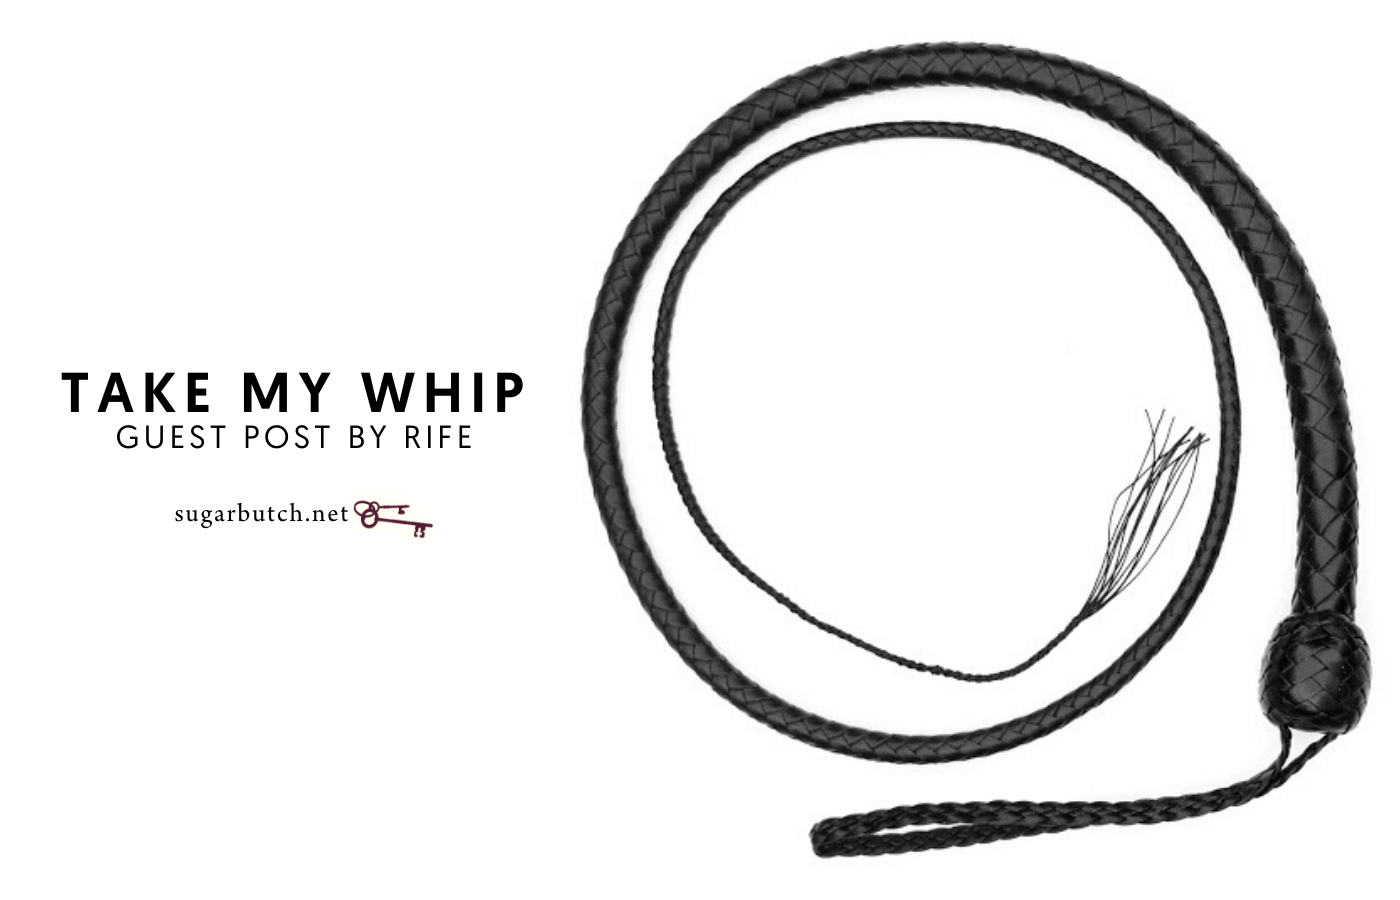 Take My Whip: Fantasy Date Night, Guest Post by rife